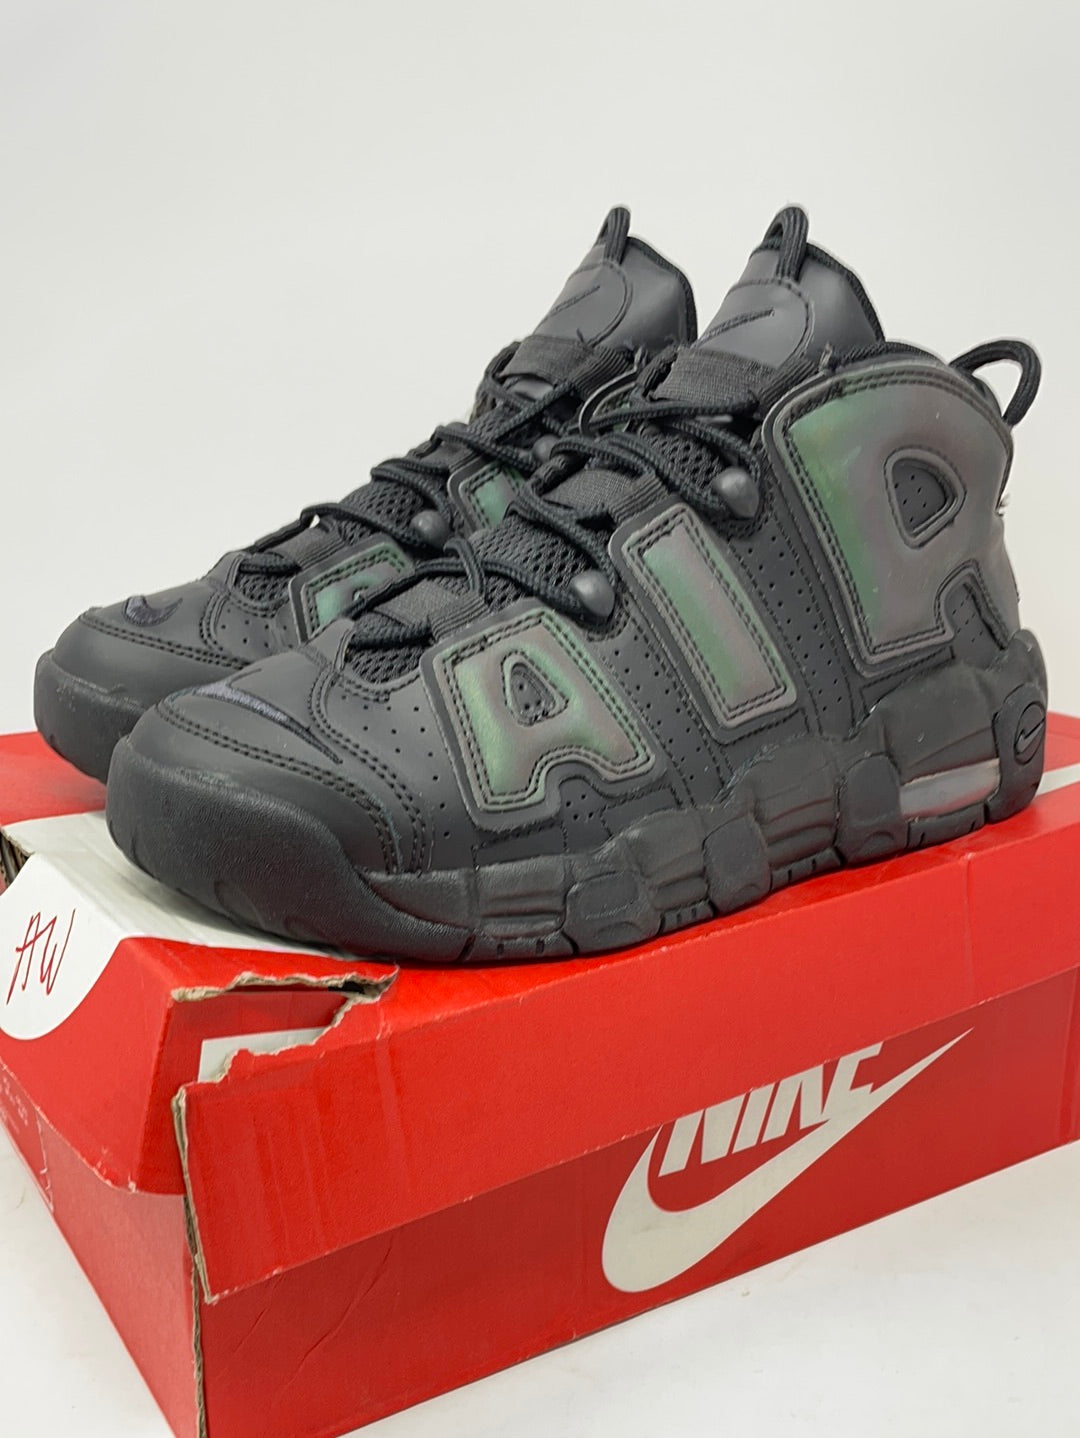 Used Air More Uptempo GS “Reflective” Sz 6.5y